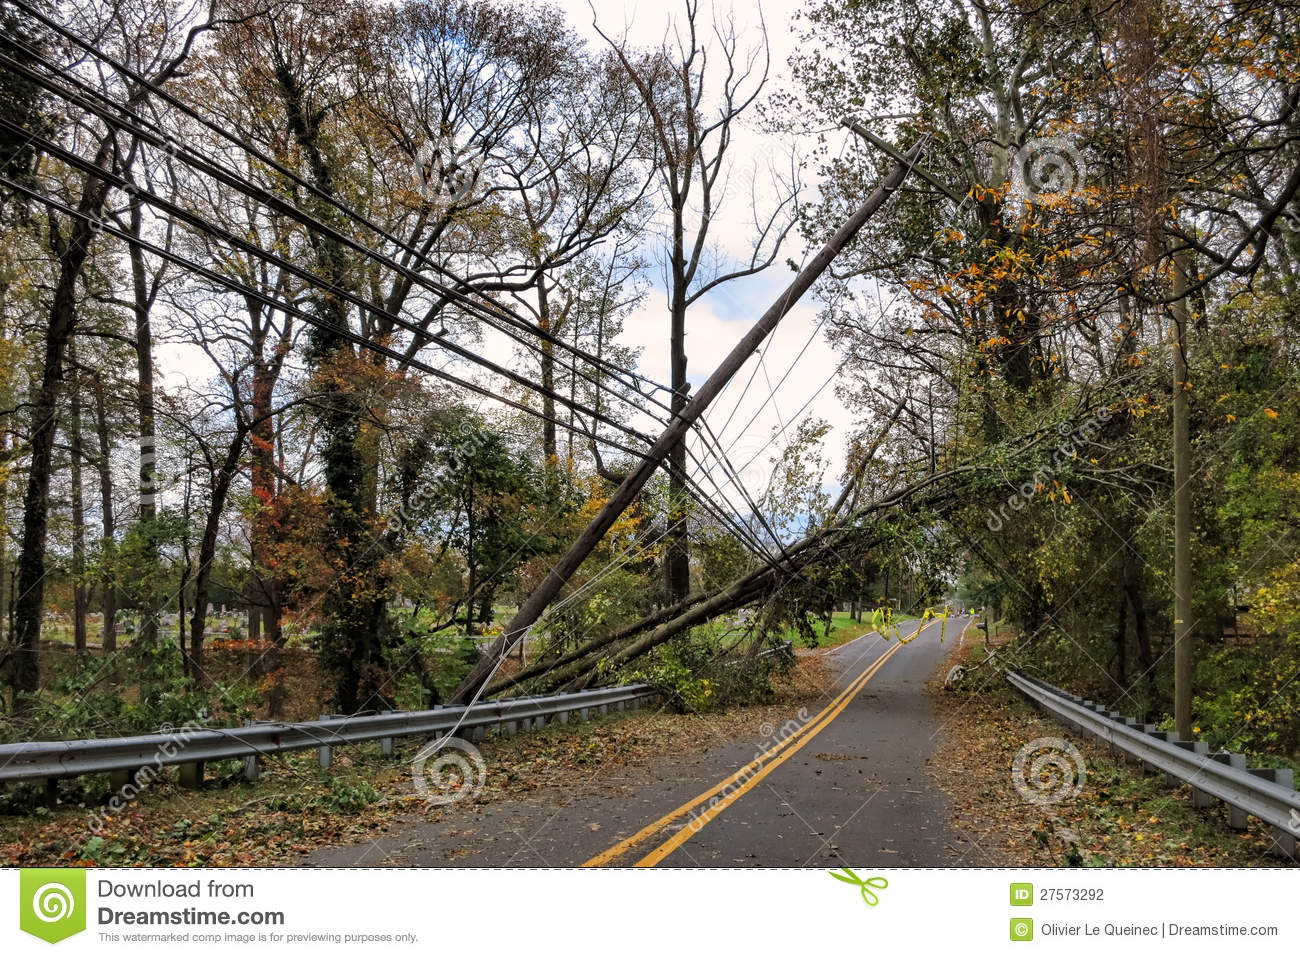 Utility Power Line And Pole Toppled By Fallen Tree Stock Photography